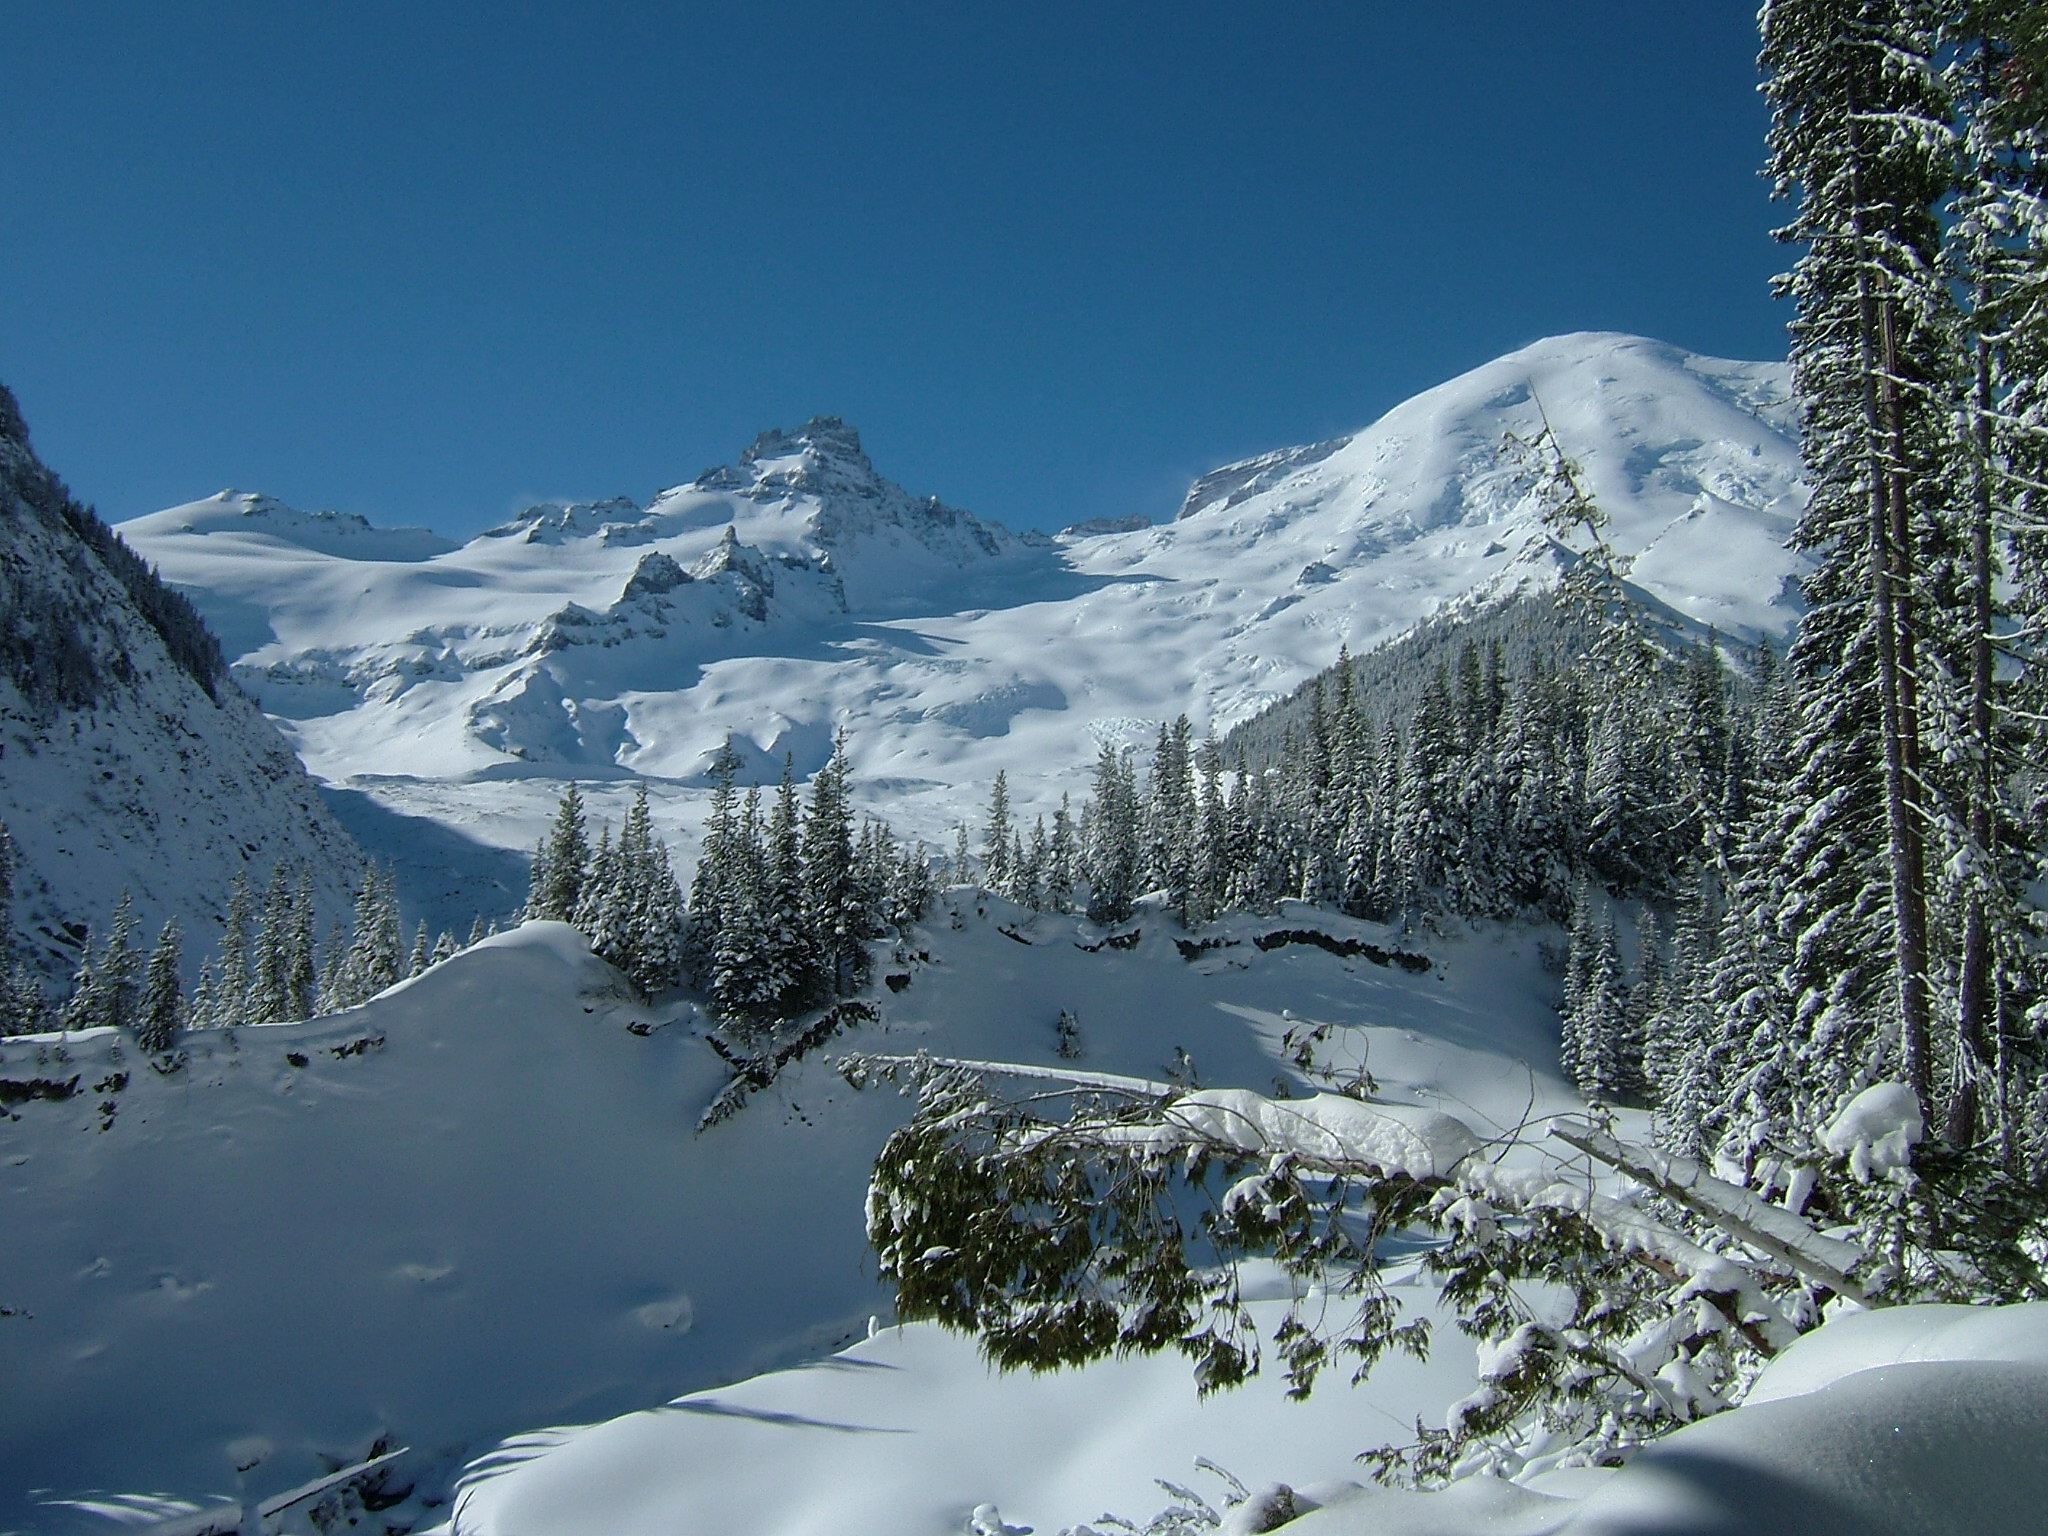 The view of Rainier, Tahoma and the Emmons glacier in the background